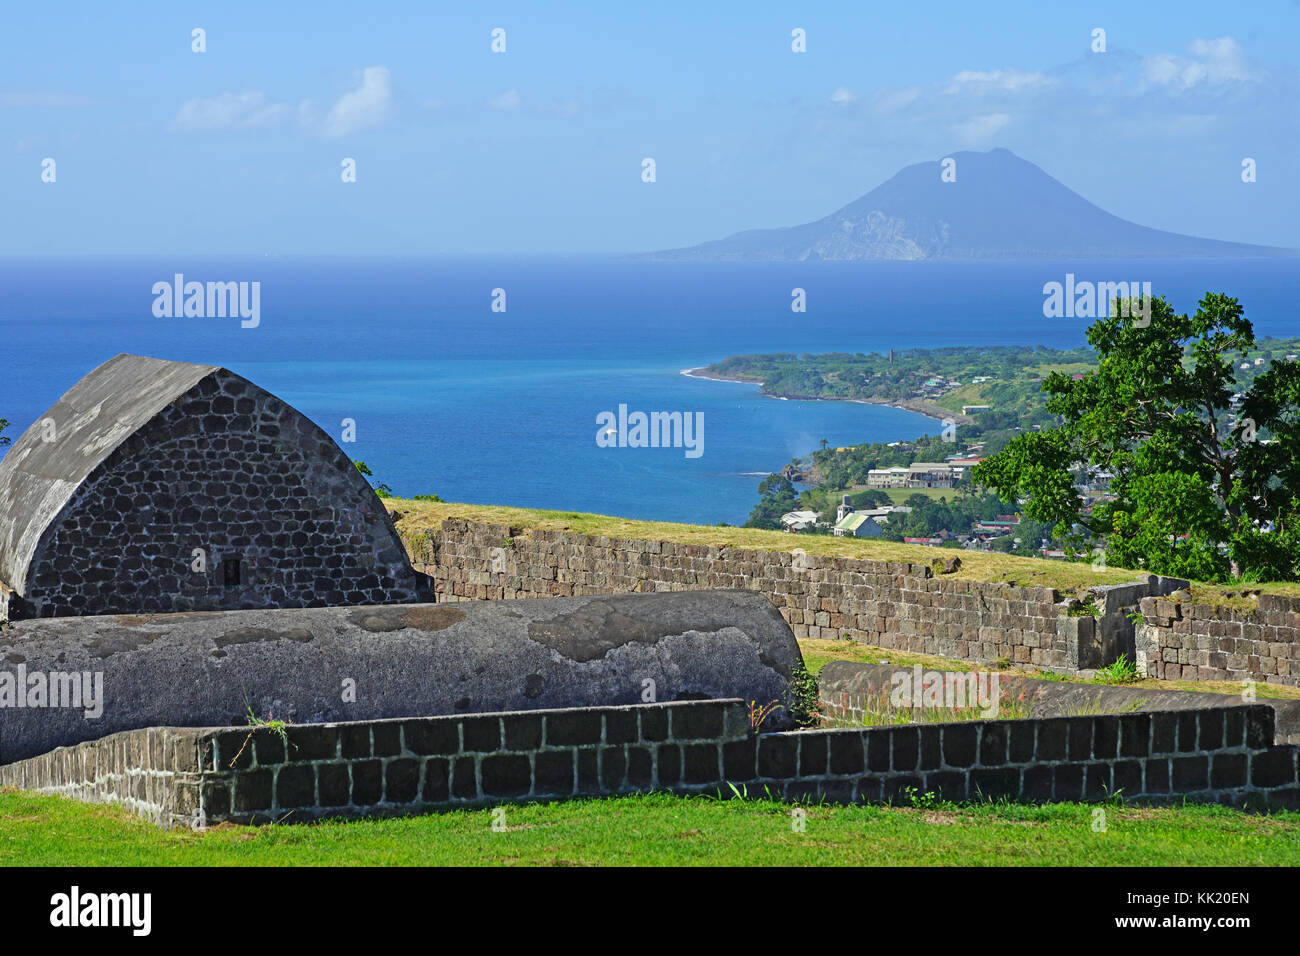 The Brimstone Hill Fortress National Park, a UNESCO World Heritage Site on the island of St Kitts (Saint Christopher) Stock Photo